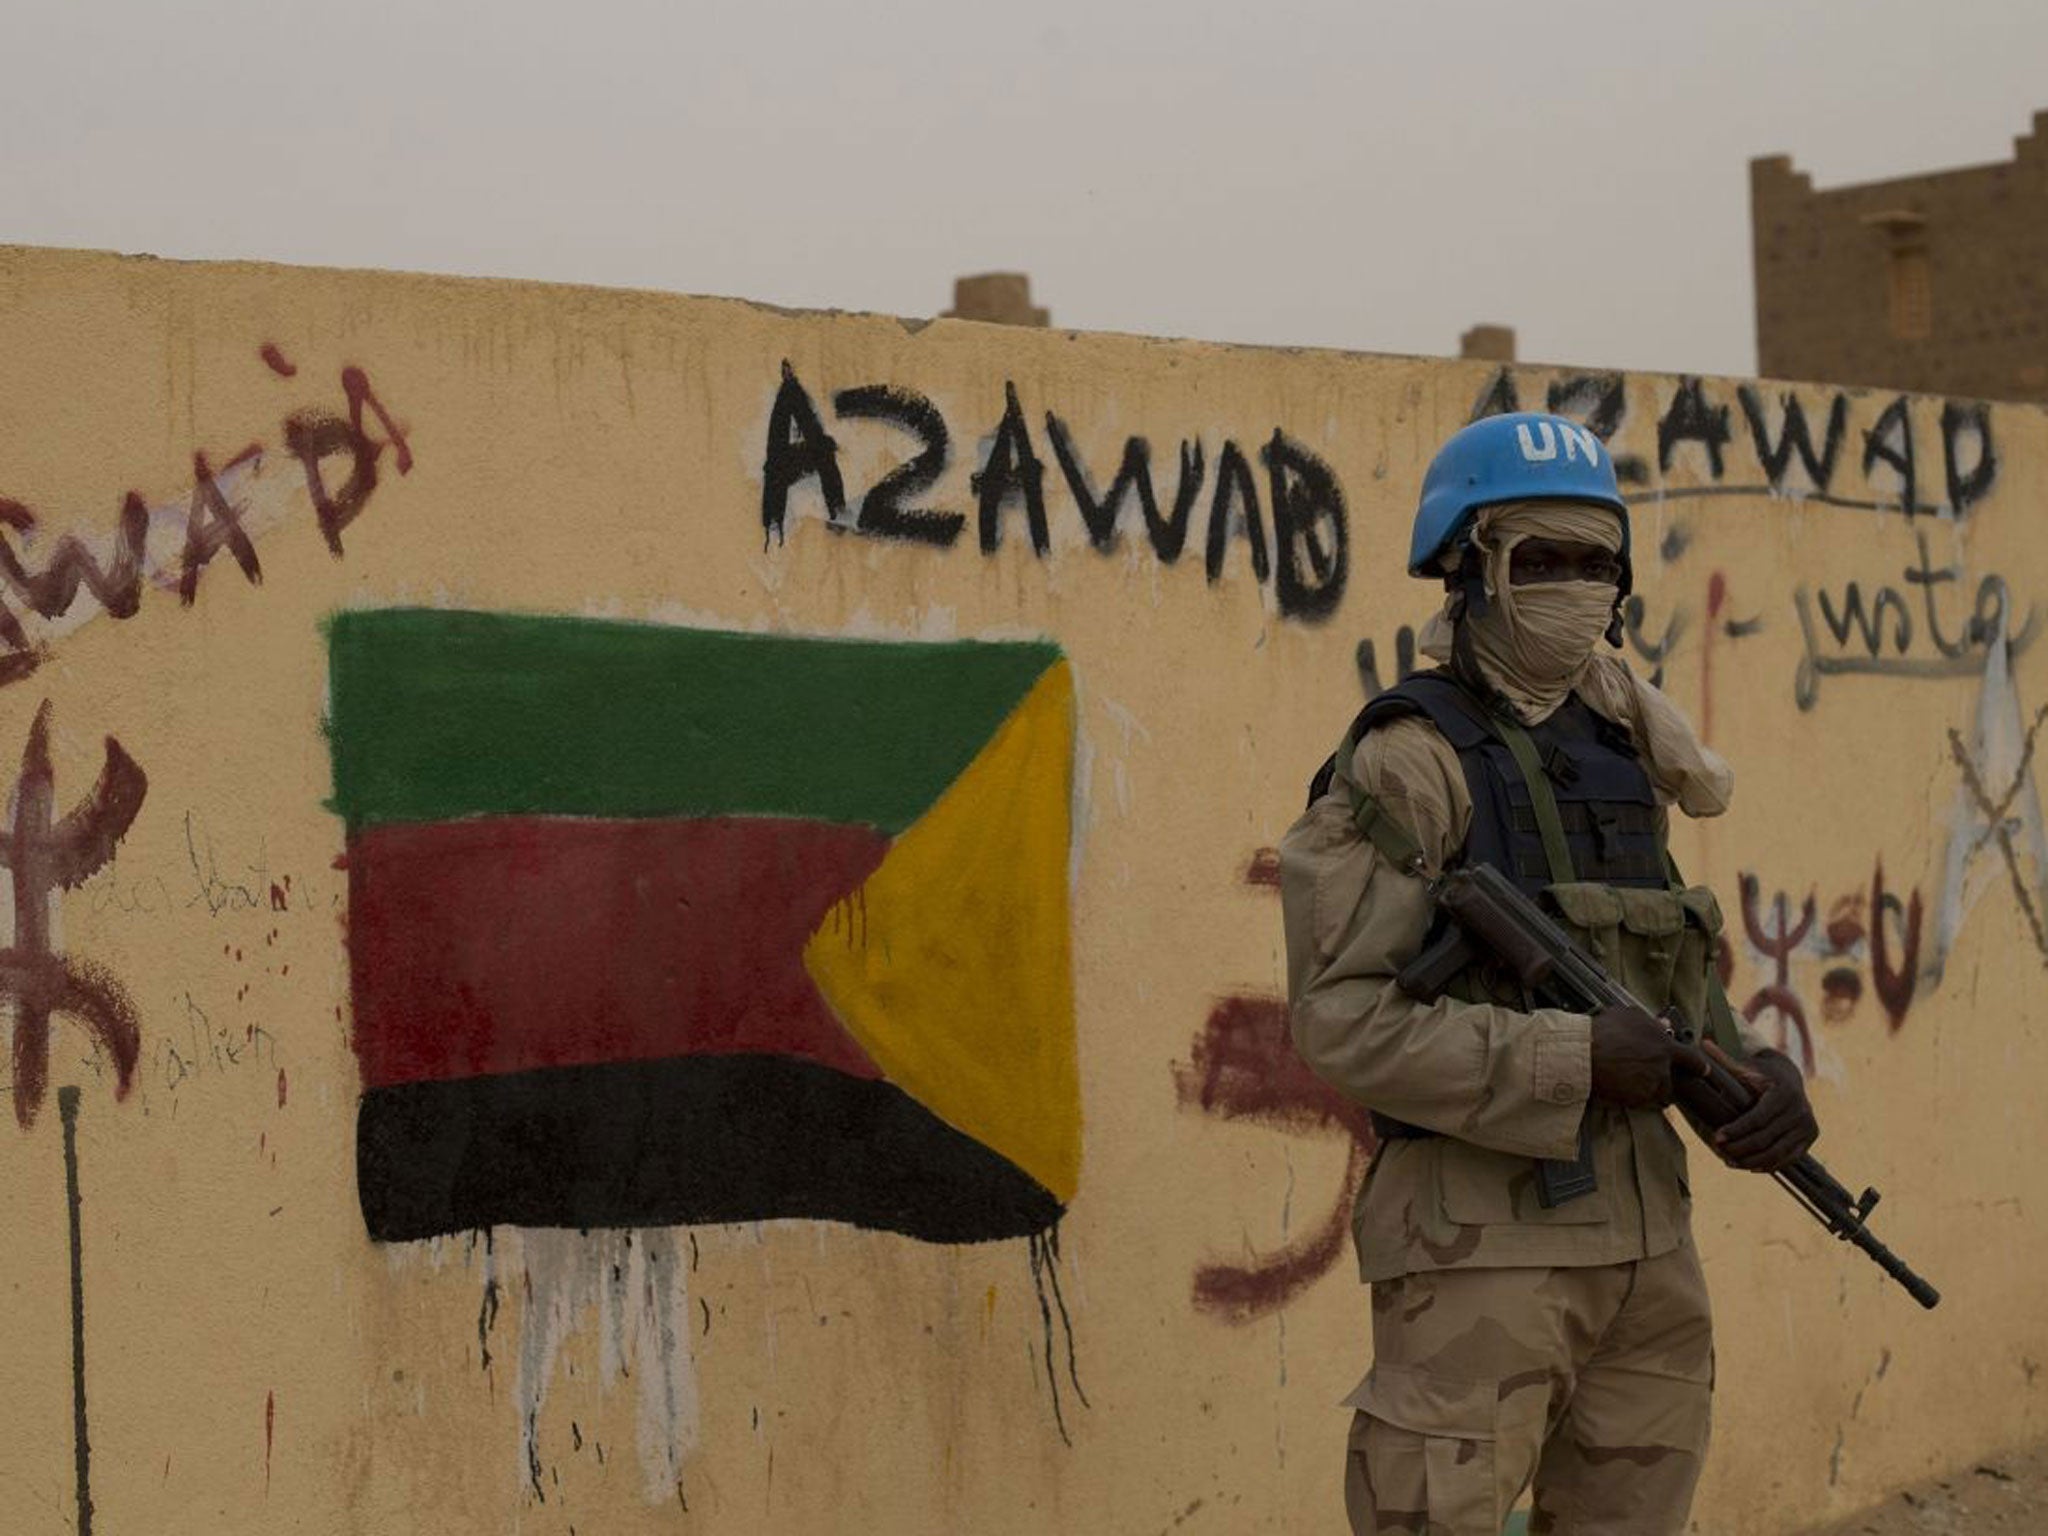 In this Sunday, July, 28, 2013 file photo, a United Nations peacekeeper stands guard at the entrance to a polling station covered in separatist flags and graffiti supporting the creation of the independent state of Azawad, in Kidal, Mali